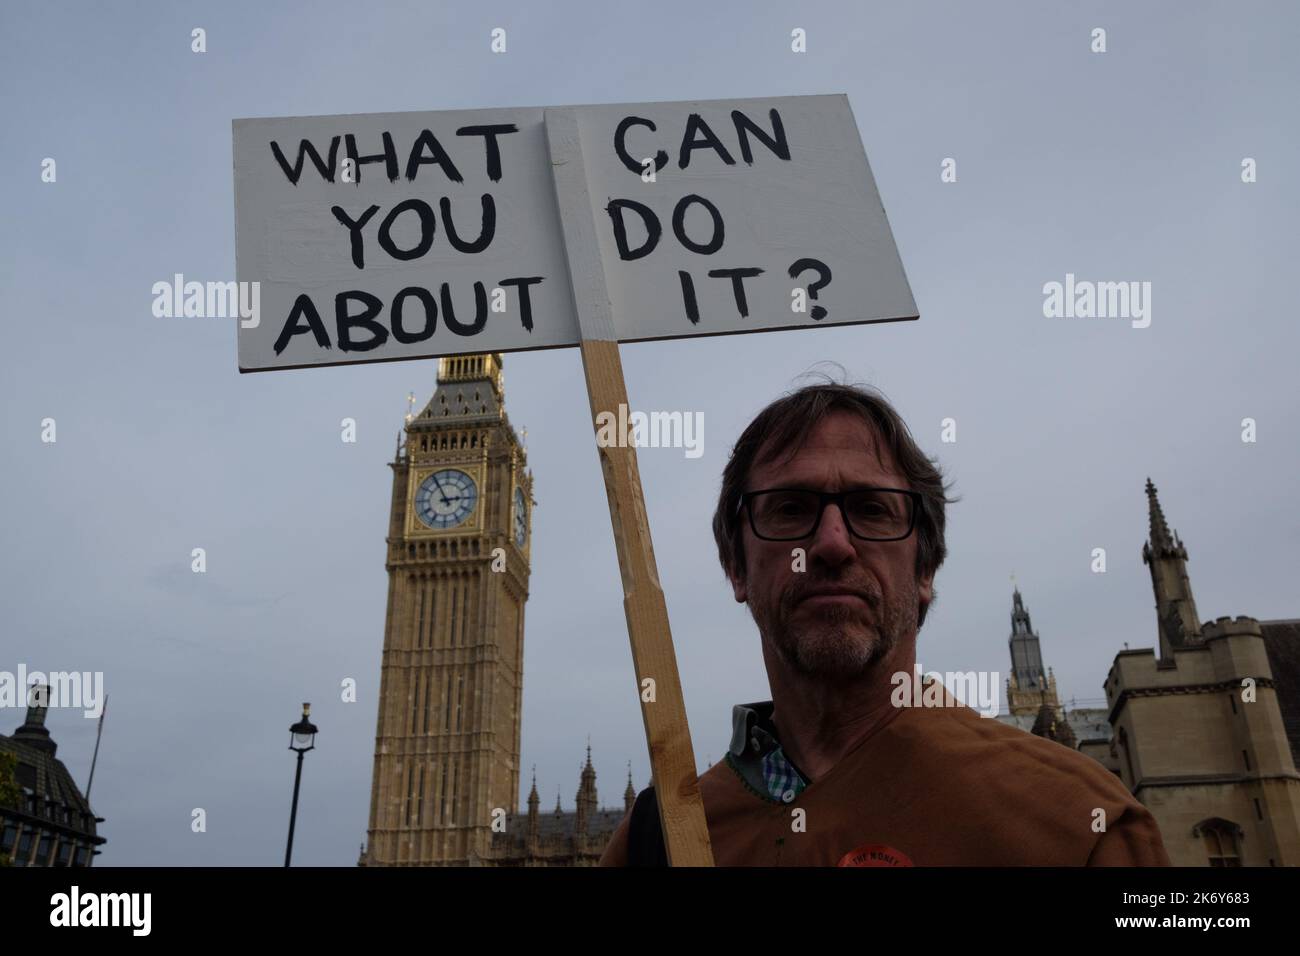 London, UK. 16 OCT, 2022. Extinction Rebellion march “Reclaim Our Future” from Hyde Park to Parliament Square. Credit: Joao Daniel Pereira/Alamy Live News Stock Photo